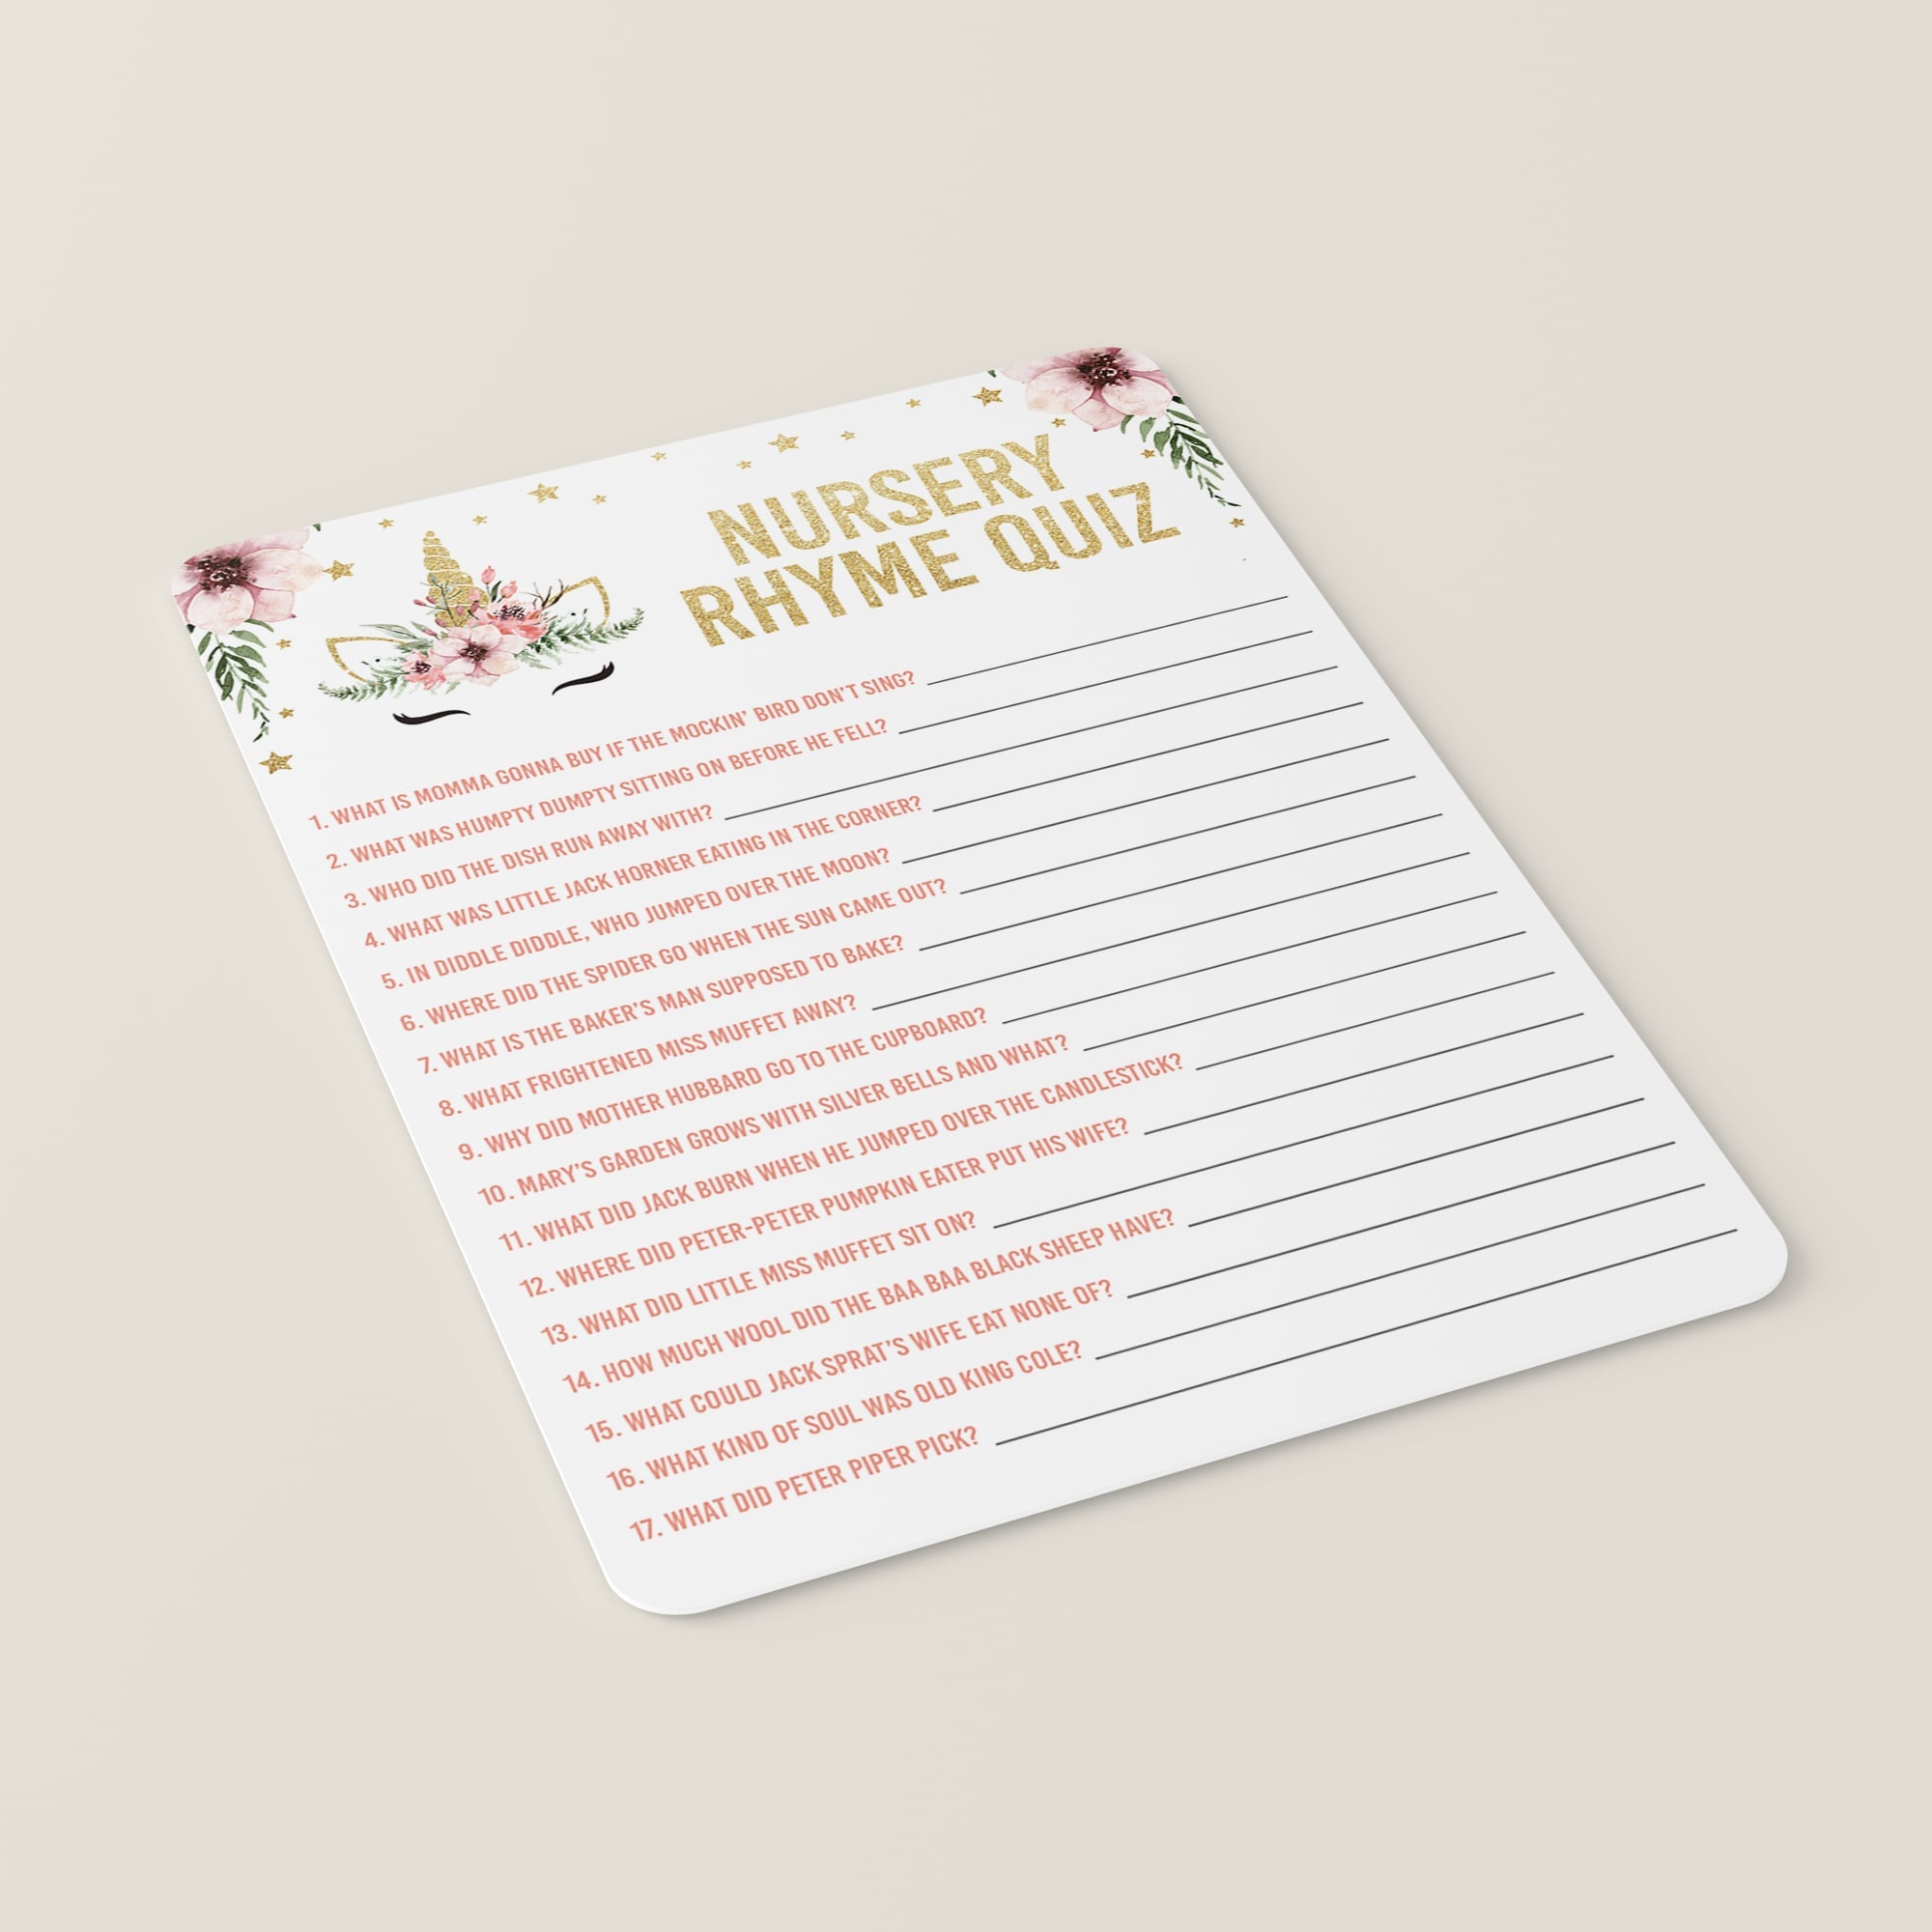 Girl baby shower nursery rhyme quiz pink and gold files by LittleSizzle